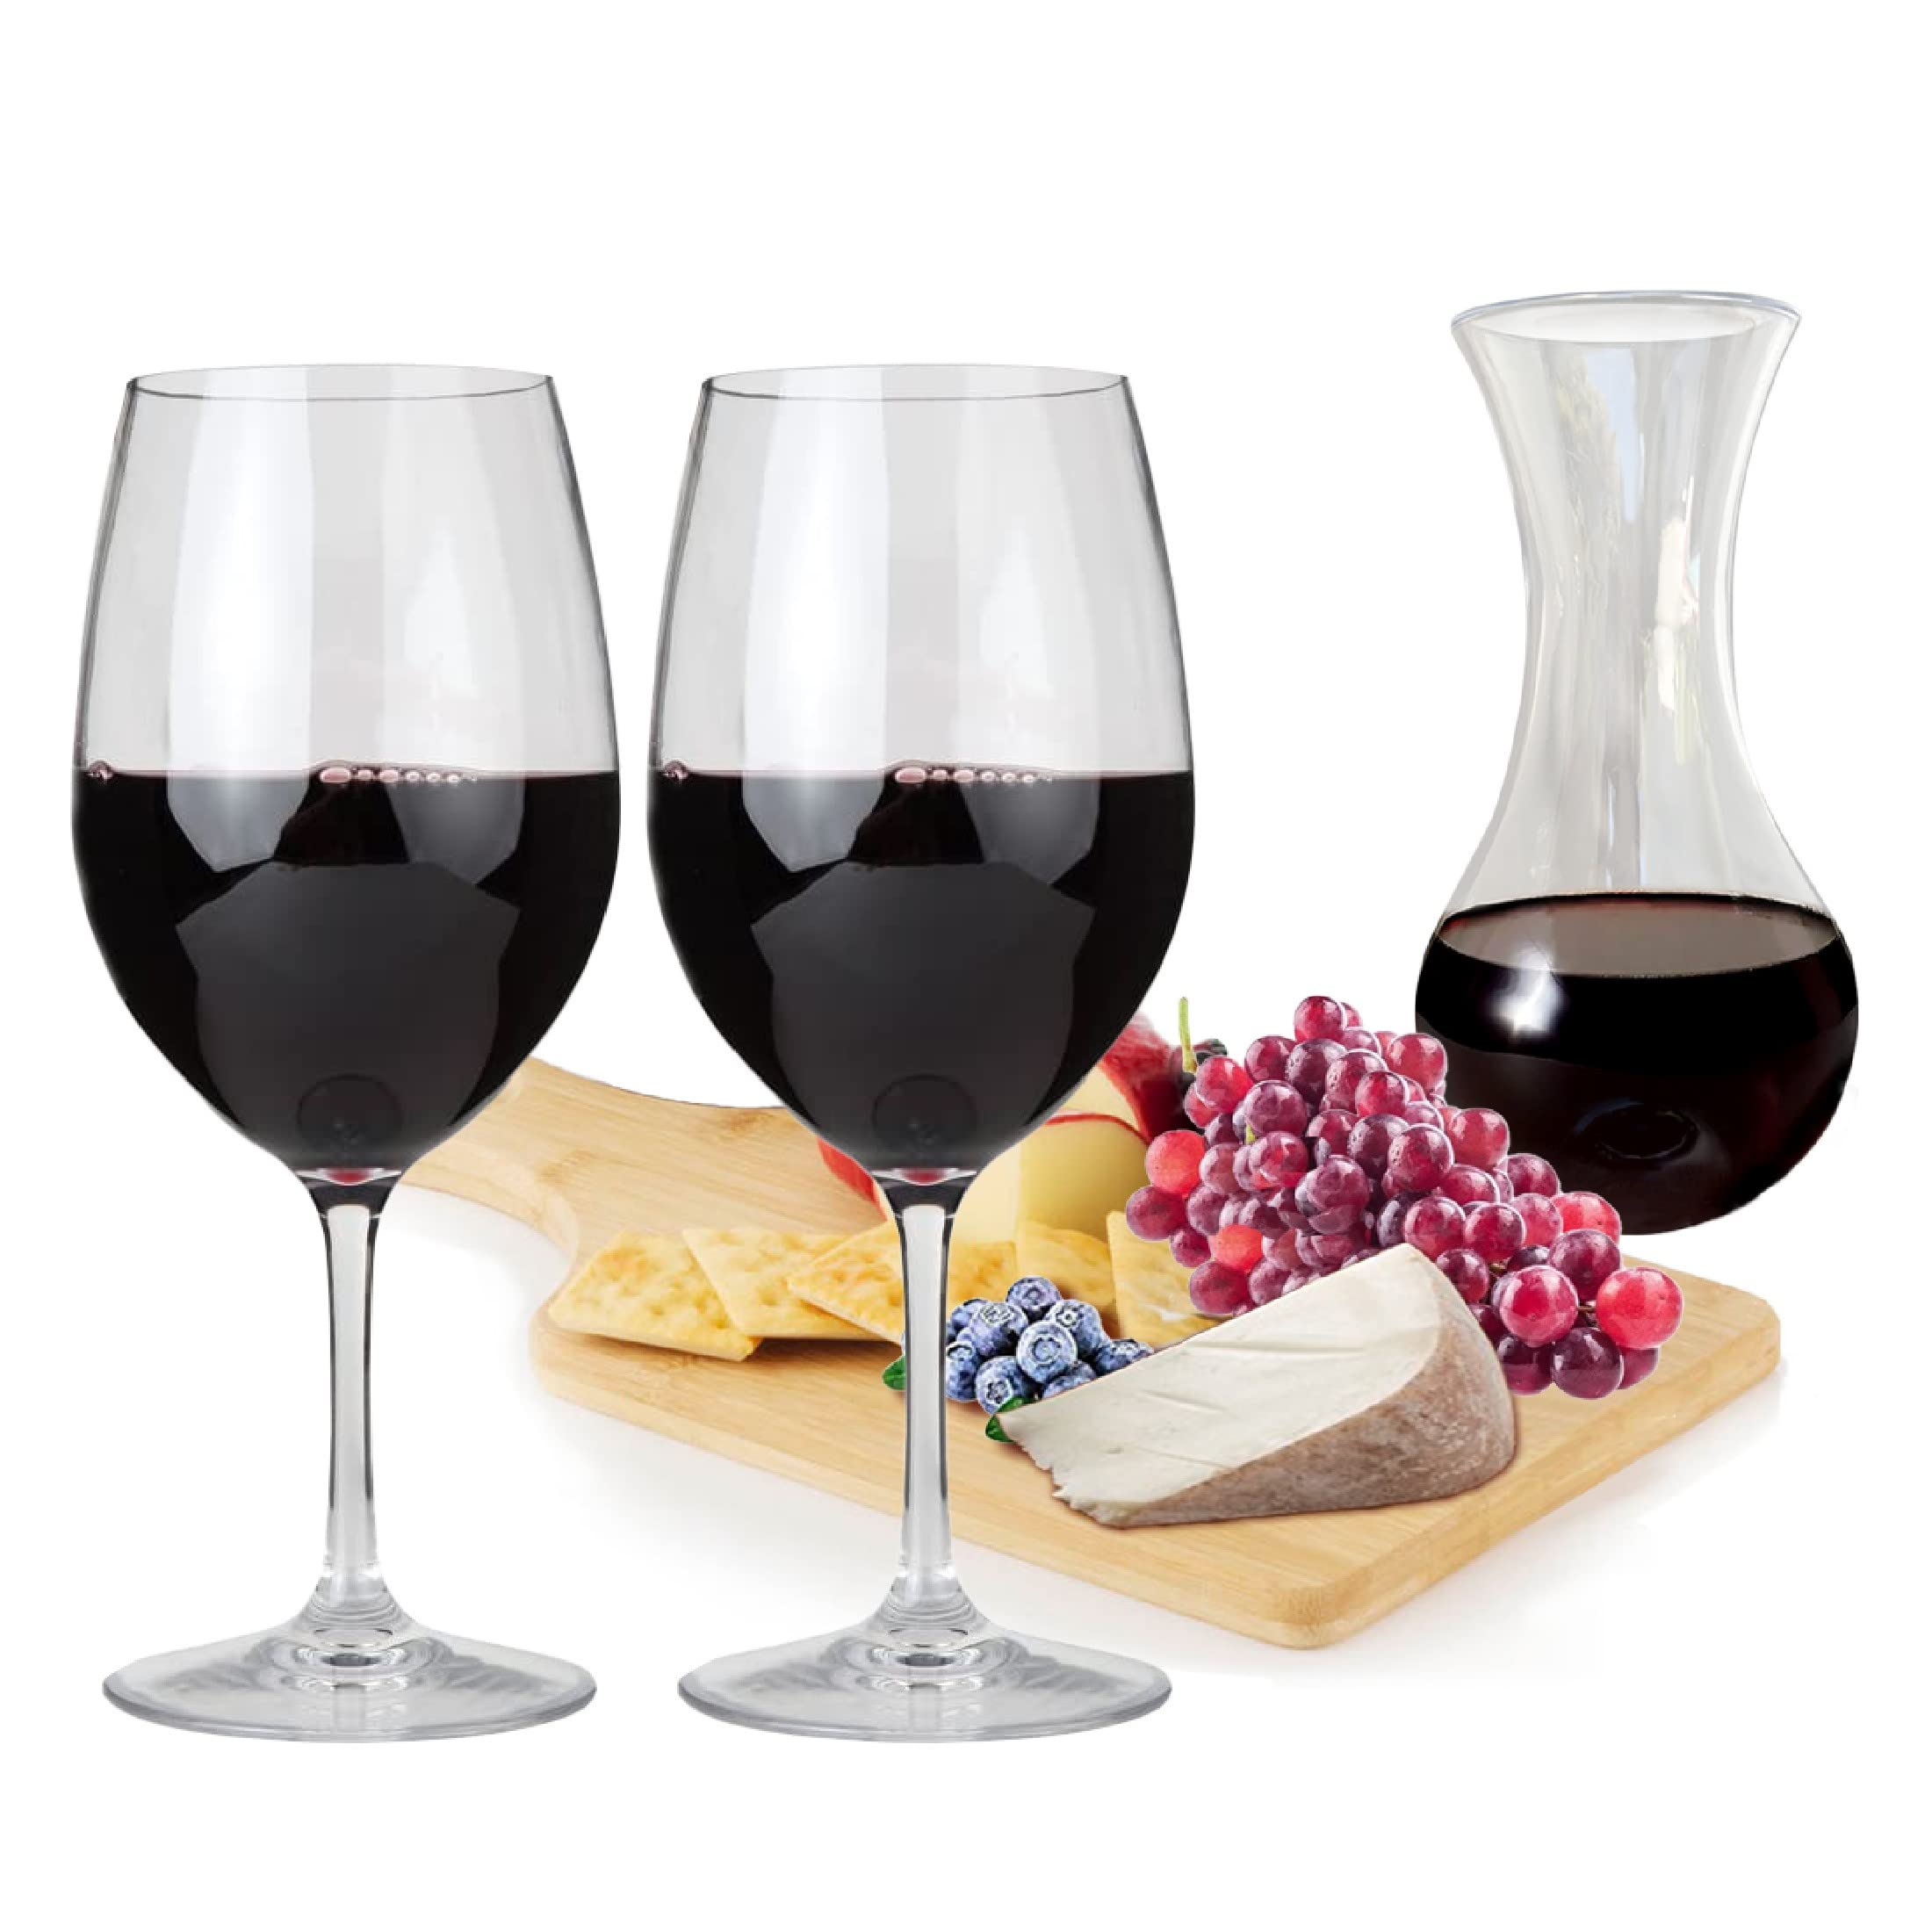 Lily's Home Unbreakable Cabernet and Merlot Bordeaux Red Wine Glasses, Made of Shatterproof Tritan Plastic, For Indoor and Outdoor Use, Reusable and Dishwasher-Safe, Crystal Clear 20 oz.